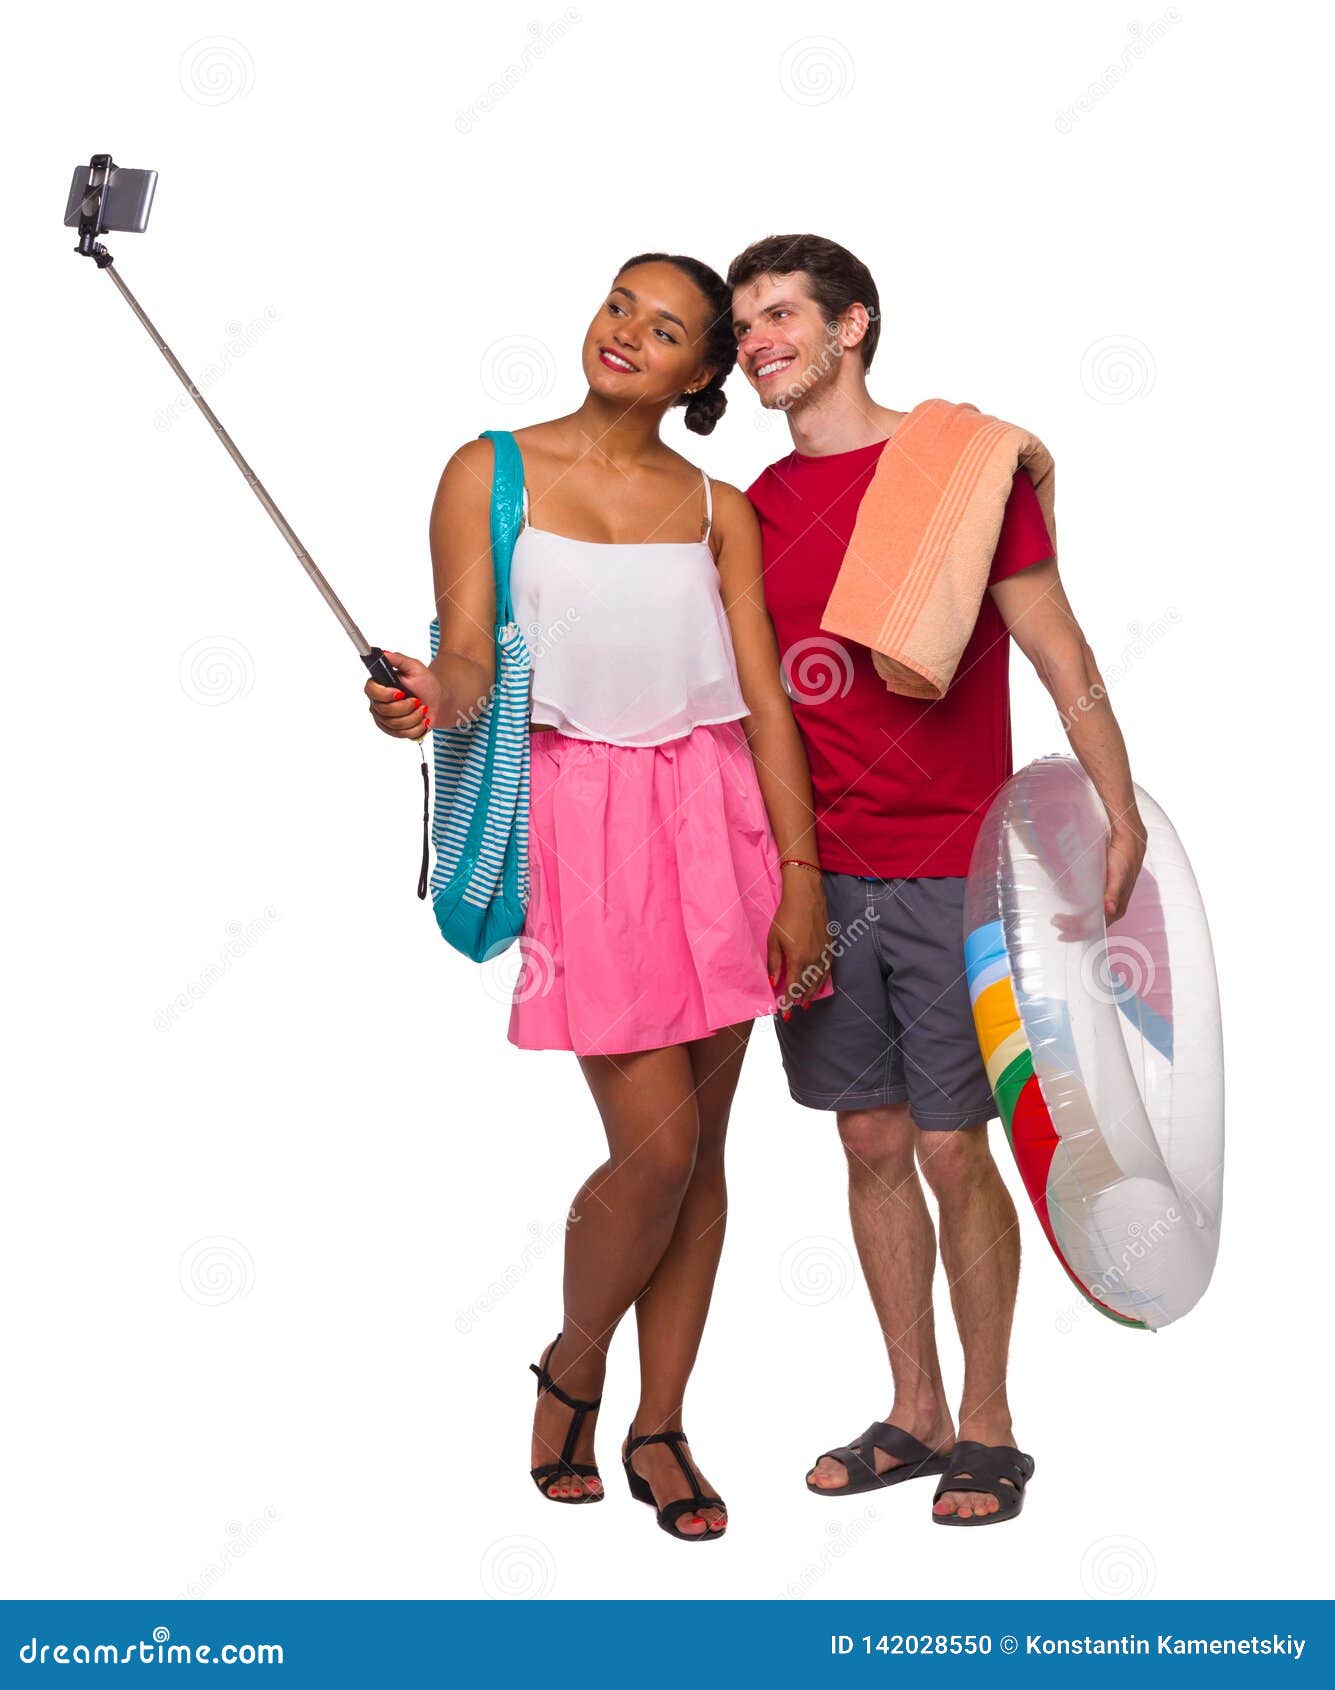 https://thumbs.dreamstime.com/z/front-view-international-couple-makes-selfie-stick-inflatable-circle-beach-accessories-beautiful-friendly-142028550.jpg